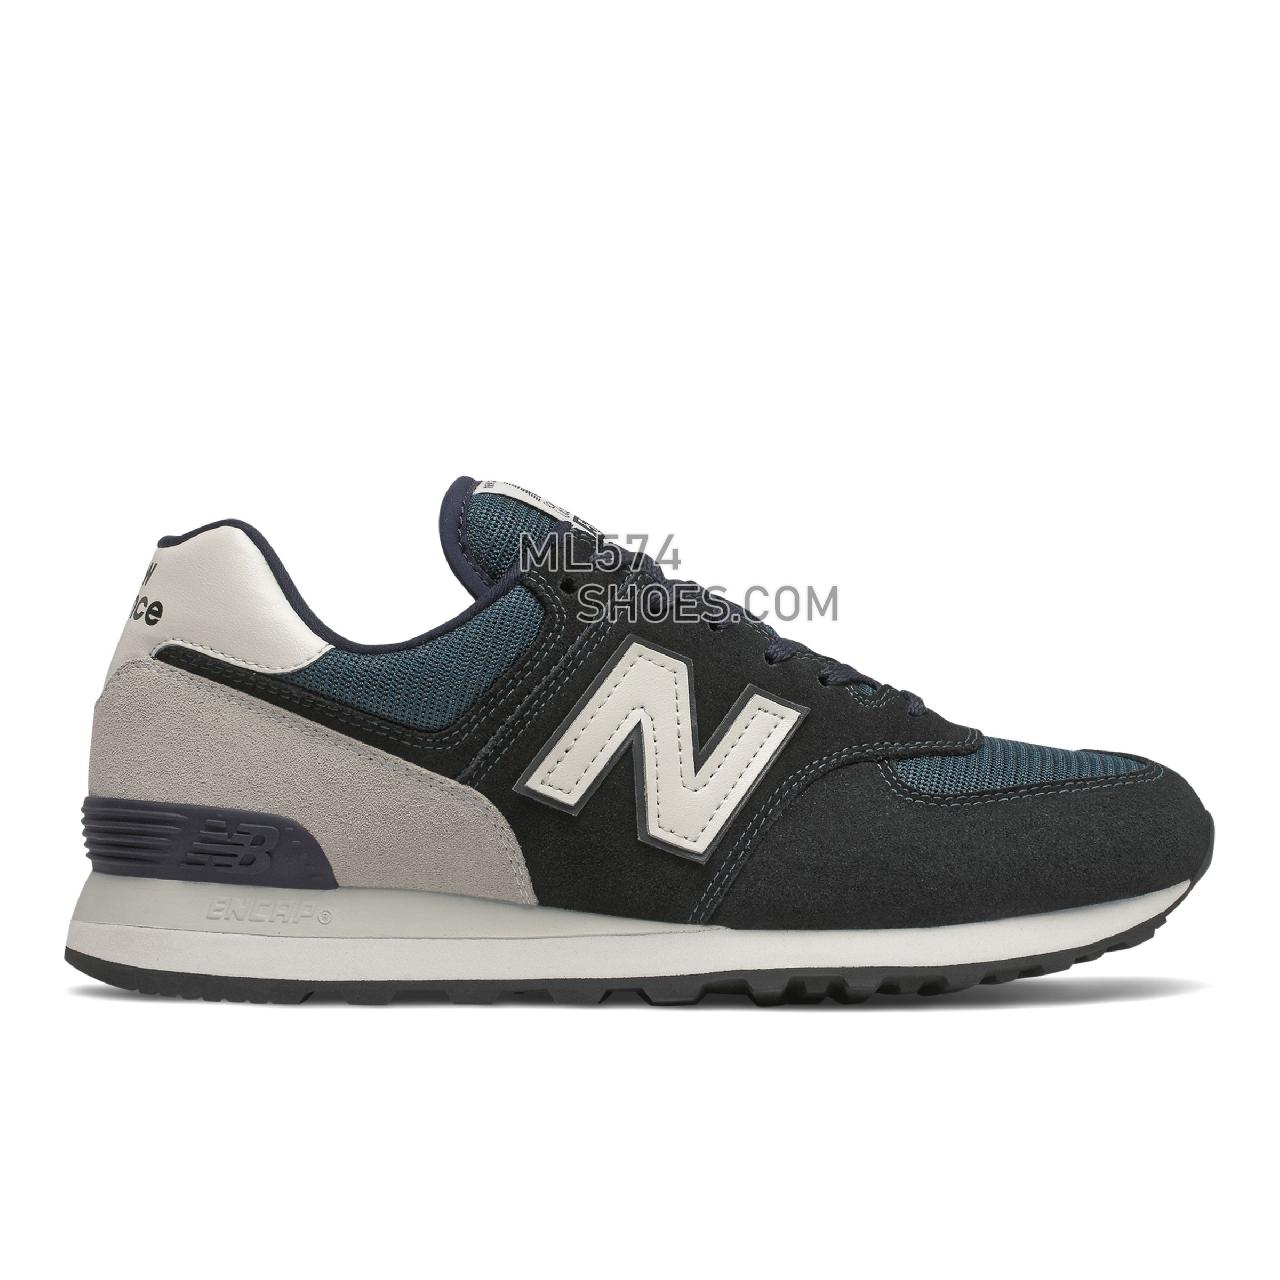 New Balance 574v2 - Unisex Men's Women's Classic Sneakers - Eclipse with Nb White - ML574BD2